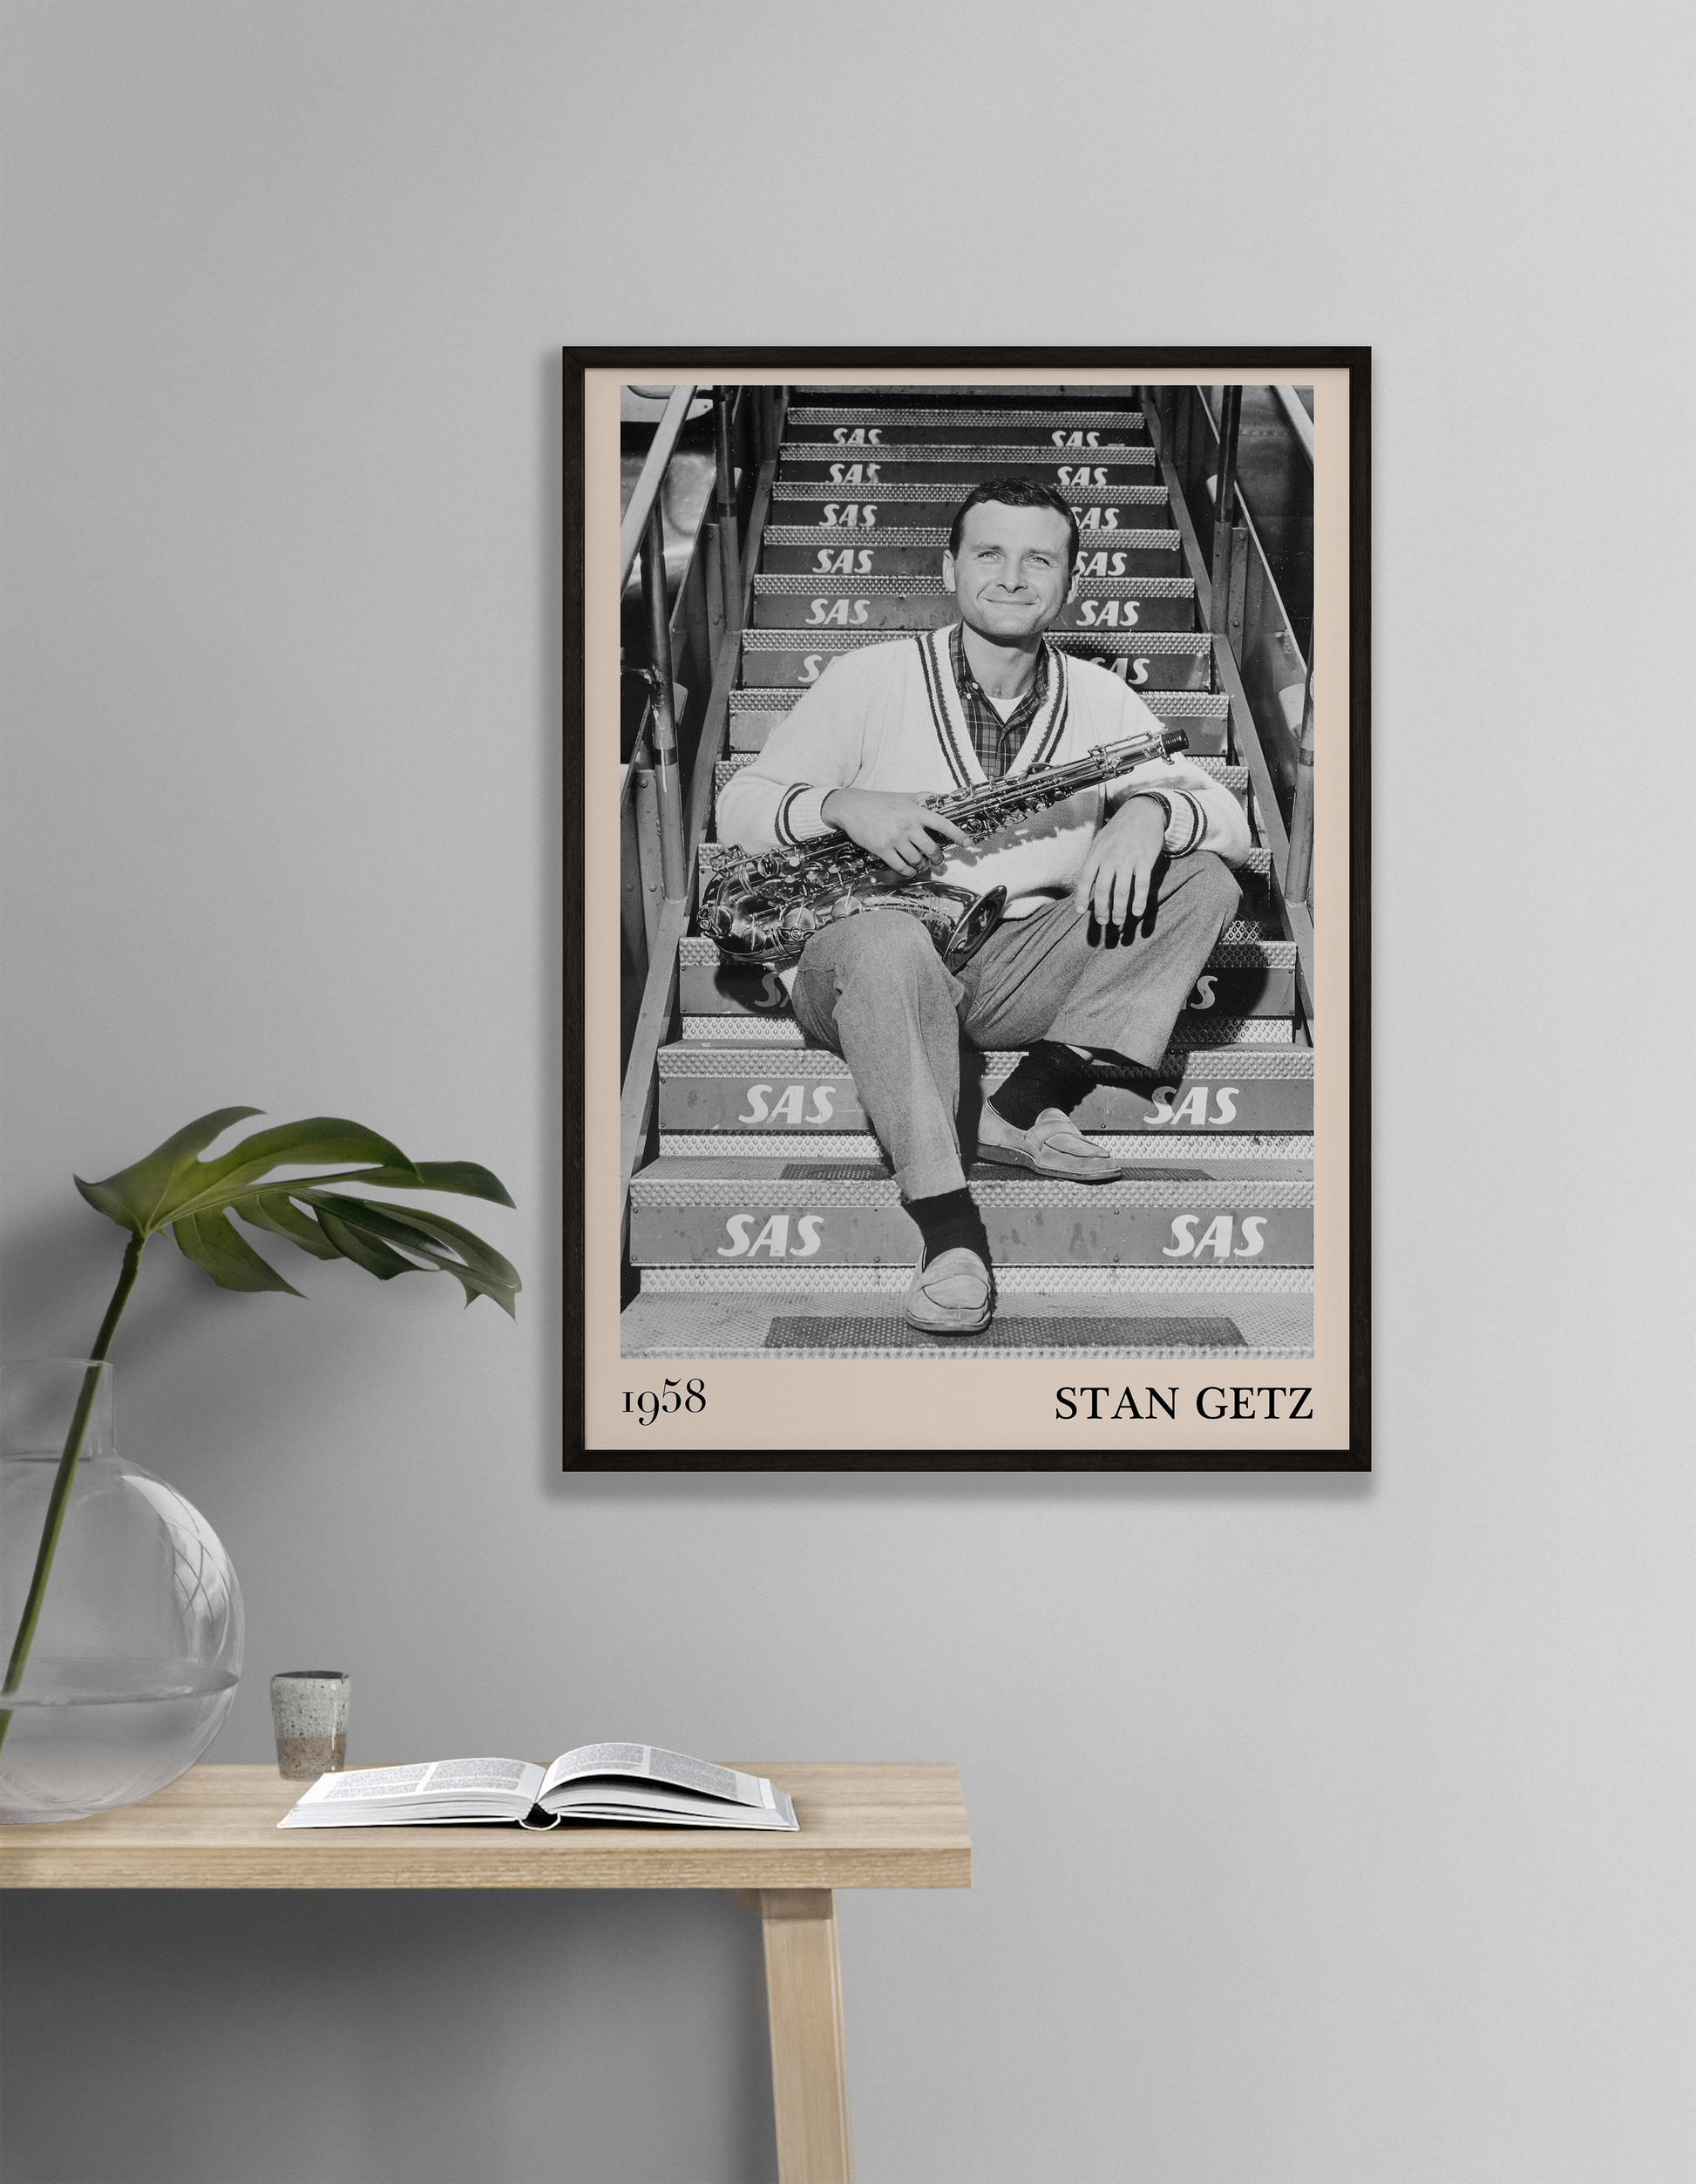 1958 picture of Stan Getz holding his saxophone. Picture crafted into a cool black framed jazz print, with an off-white border. Poster is hanging on a grey living room wall